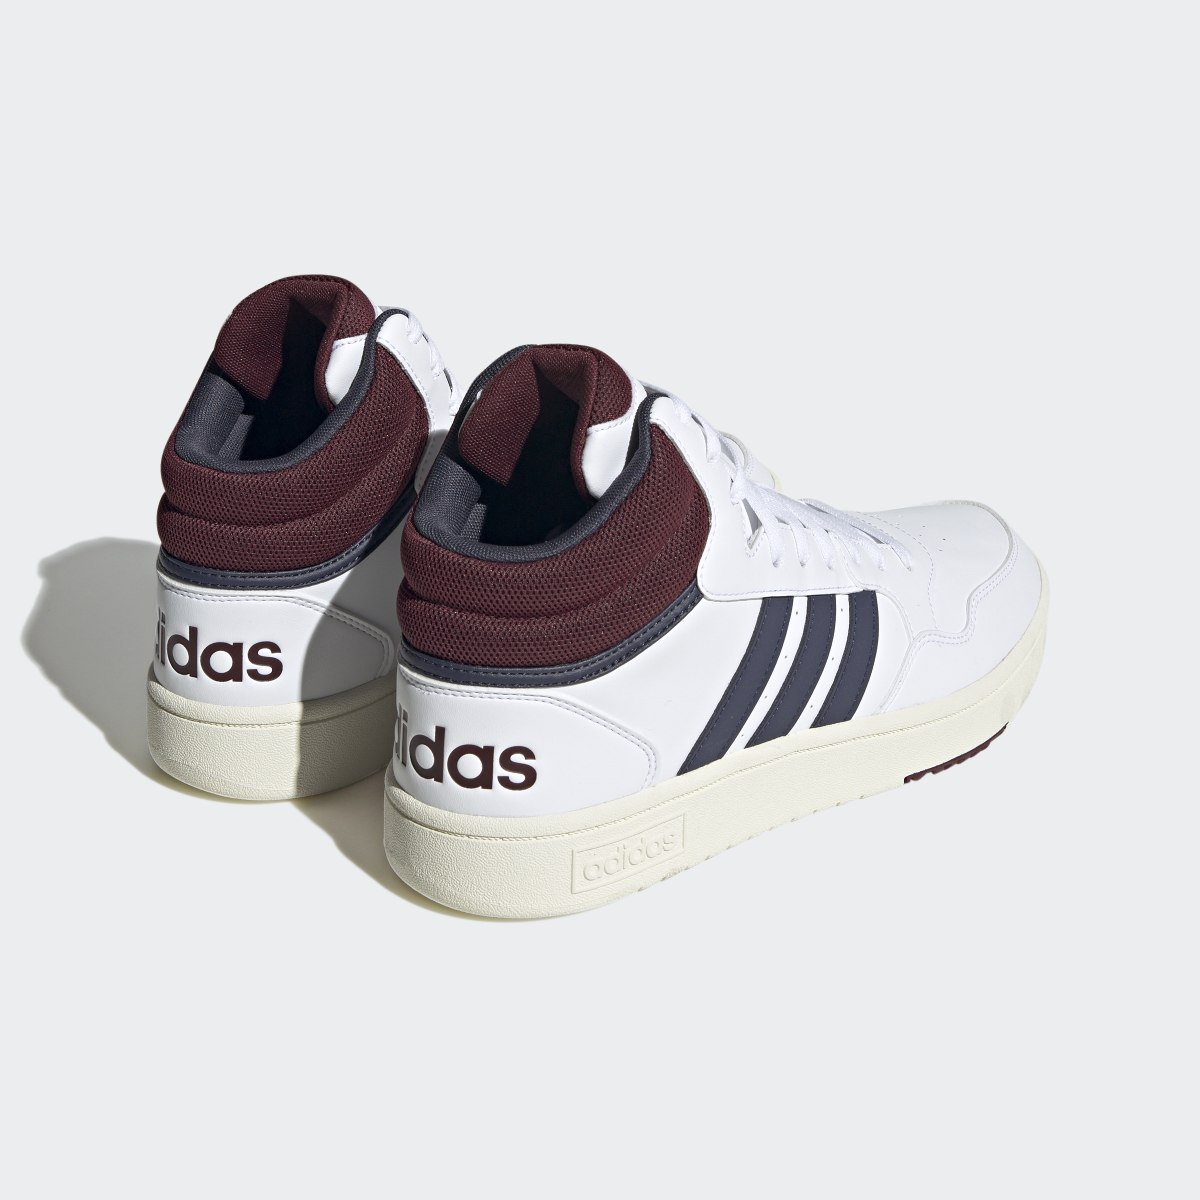 Adidas Hoops 3.0 Mid Lifestyle Basketball Classic Vintage Schuh. 6